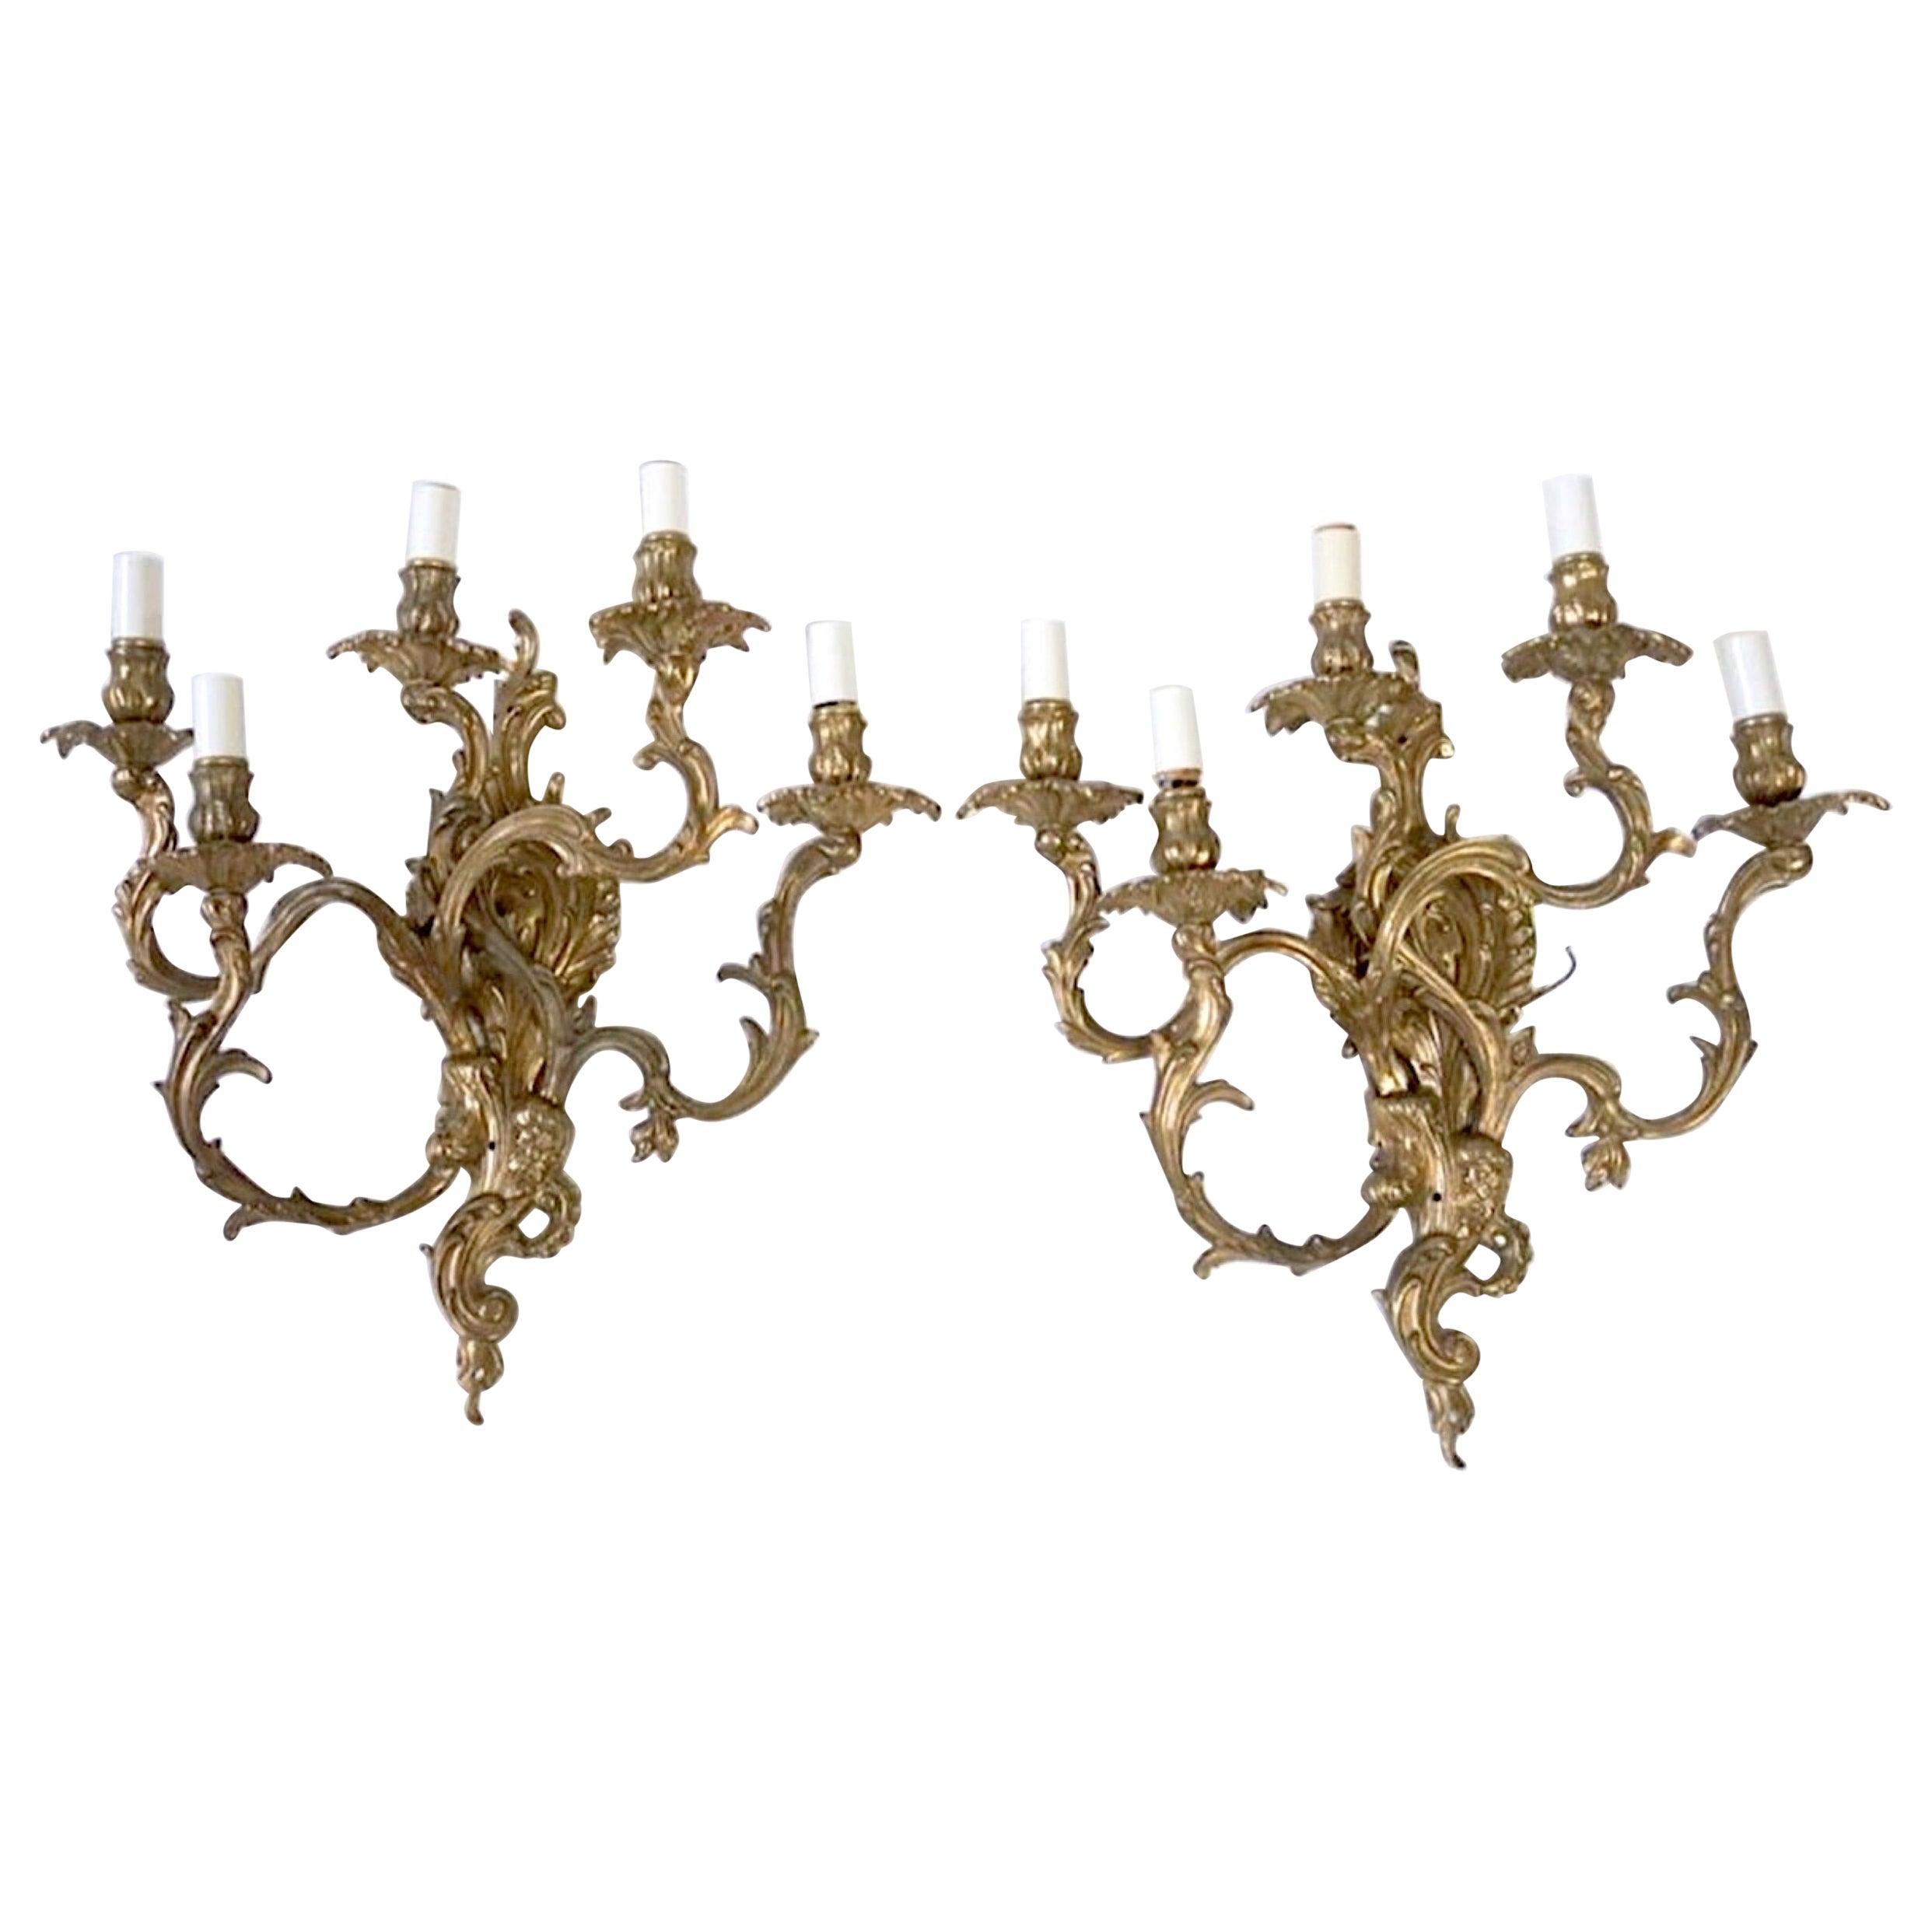 19th Century French Rococo 5 Arm Wired Wall Sconces - a Pair For Sale